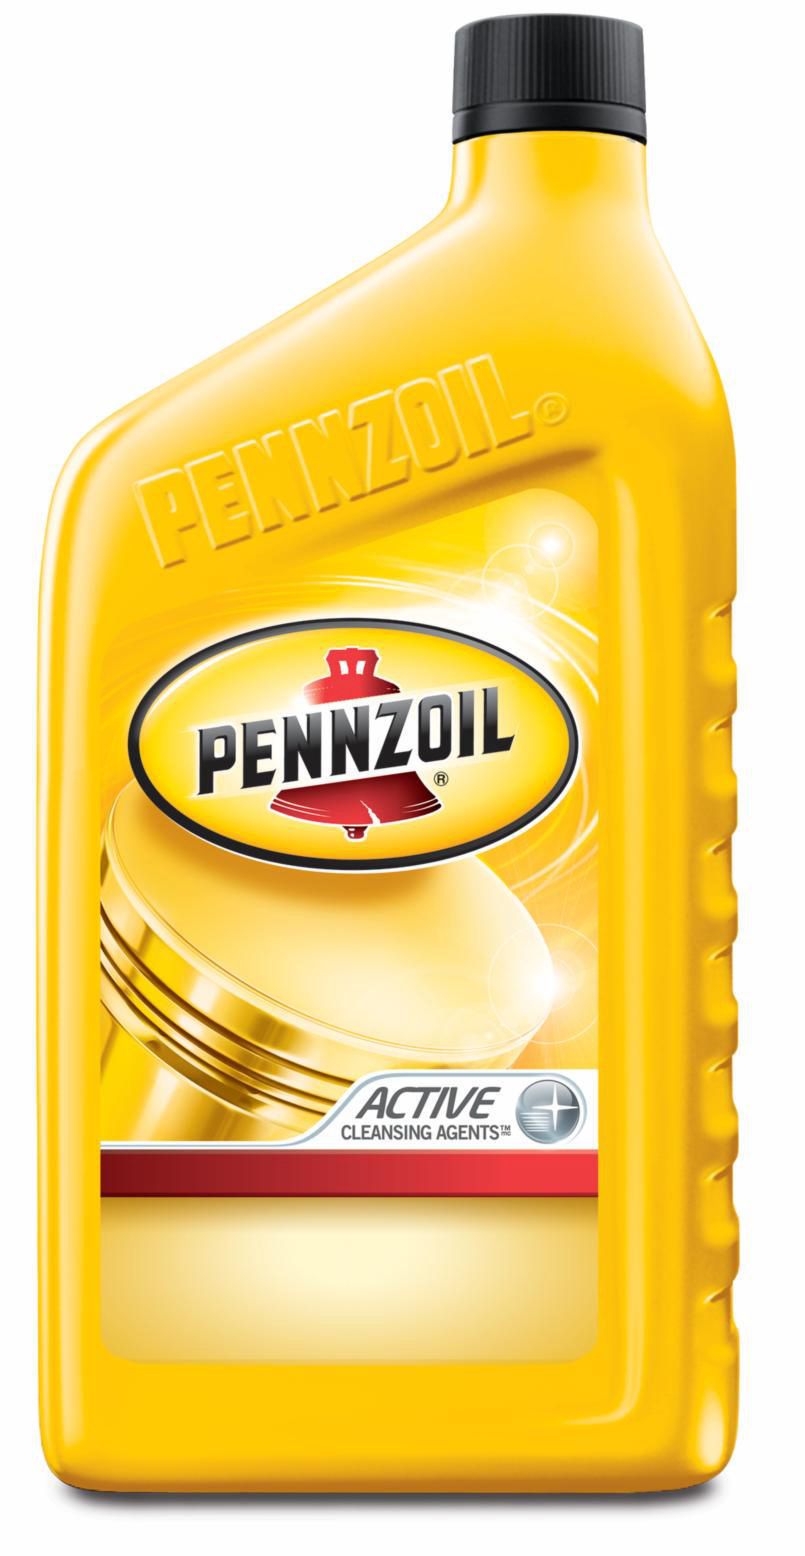 pennzoil-motor-oil-5-quart-jug-only-12-68-after-mail-in-rebate-at